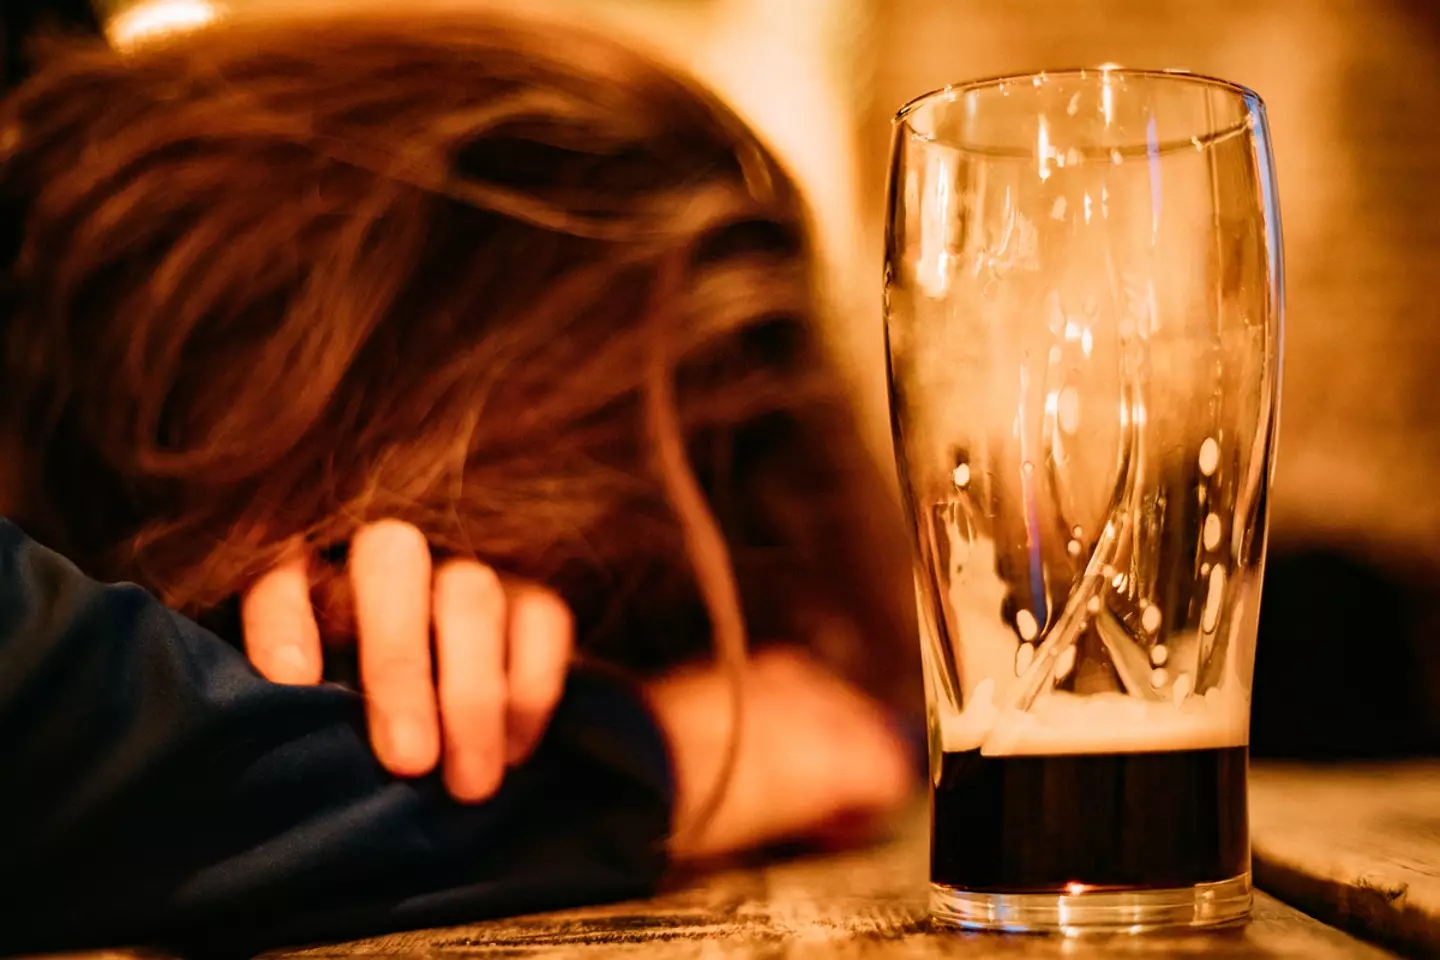 Hangovers might be a thing of the past, provided you use the gel properly. (Getty Stock Photo)